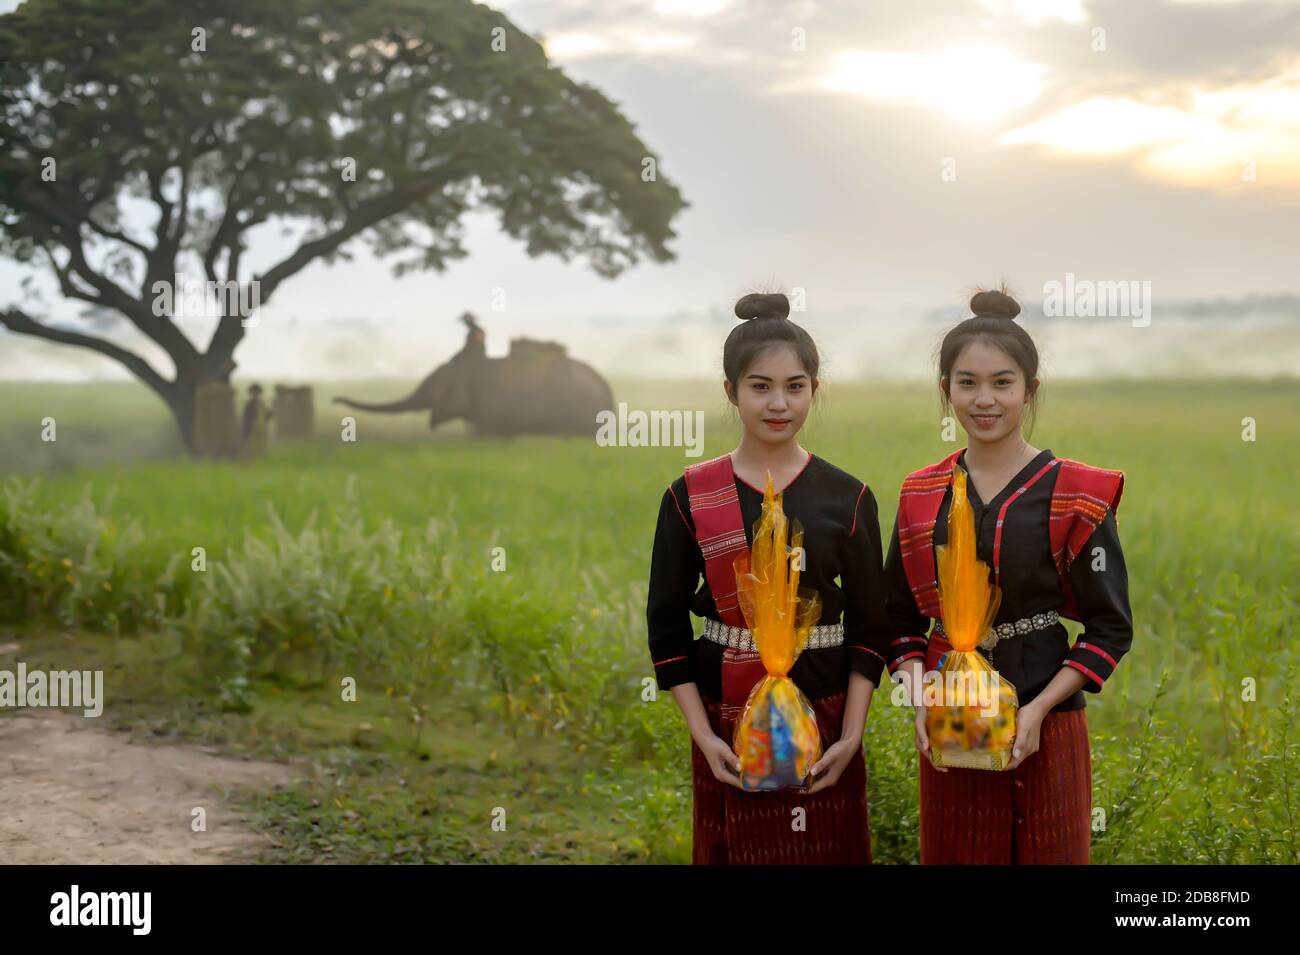 Two young women standing side by side holding wrapped gifts, Thailand Stock Photo